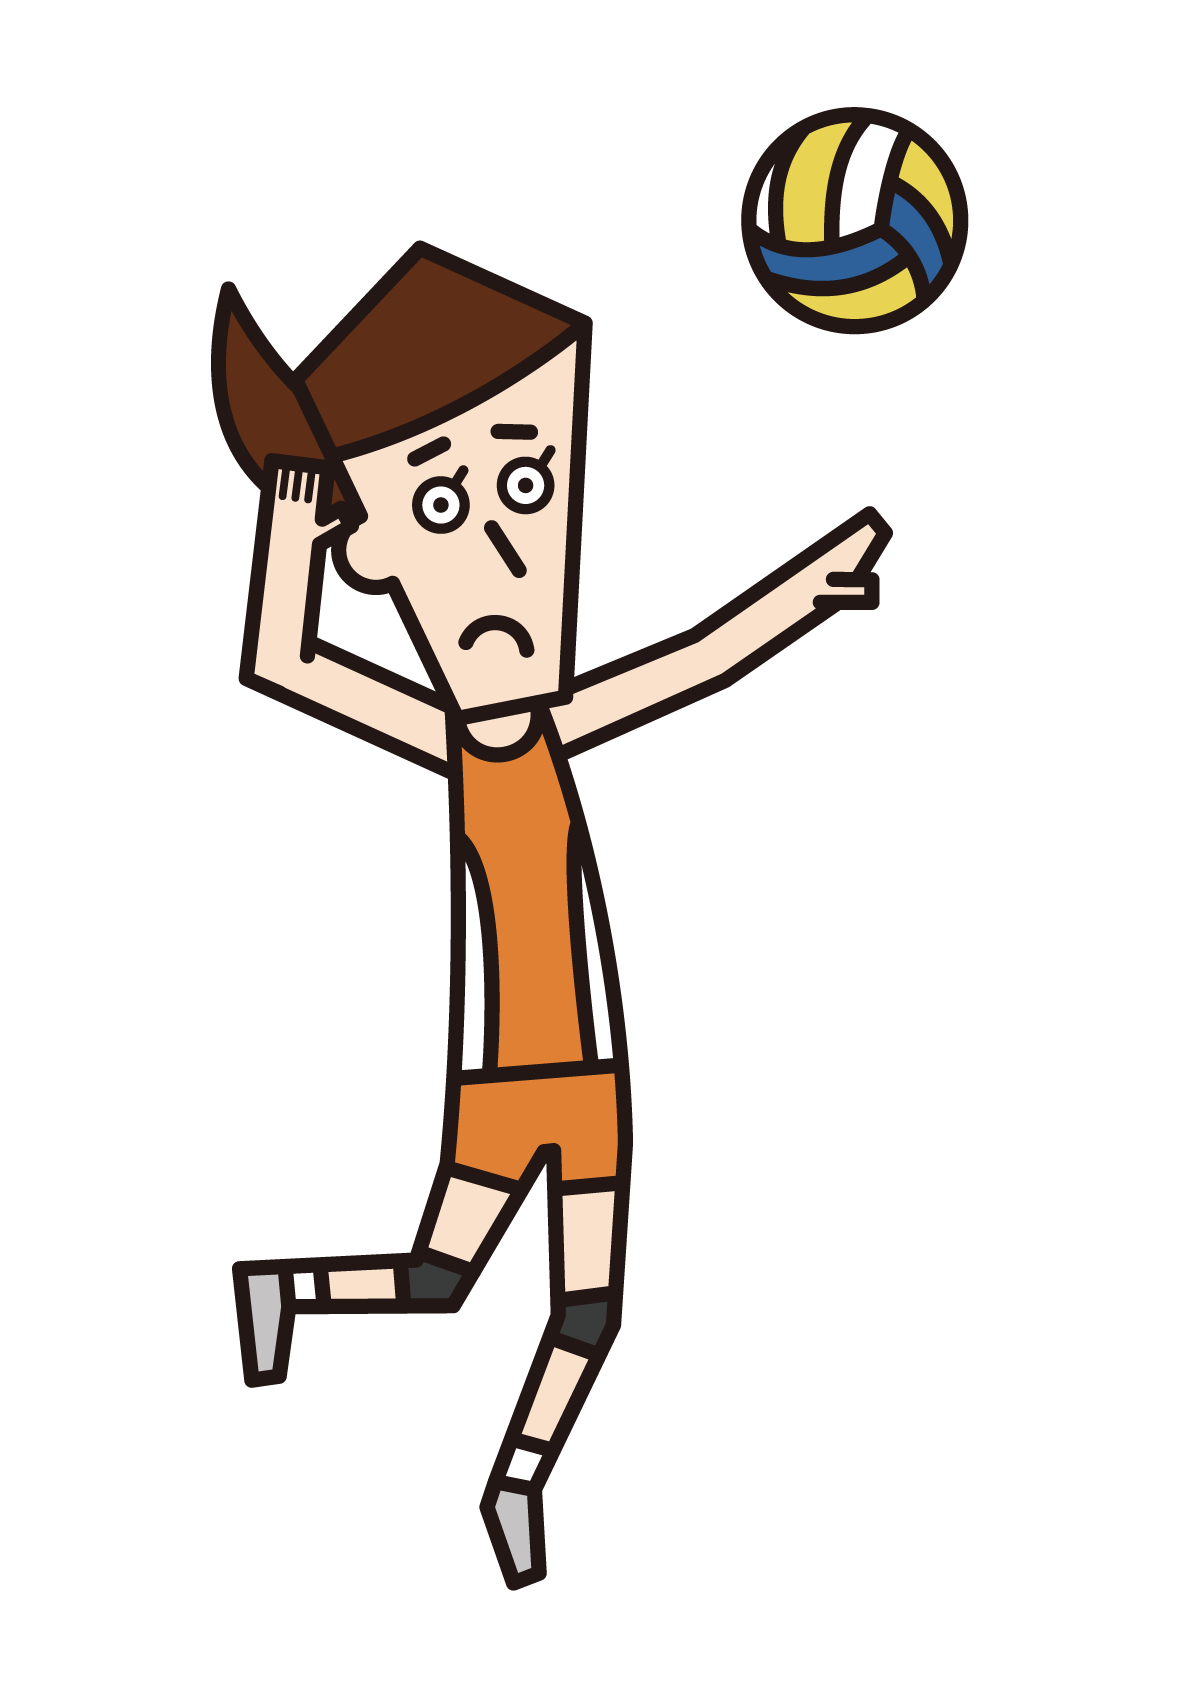 Illustration of a volleyball player (female) serving